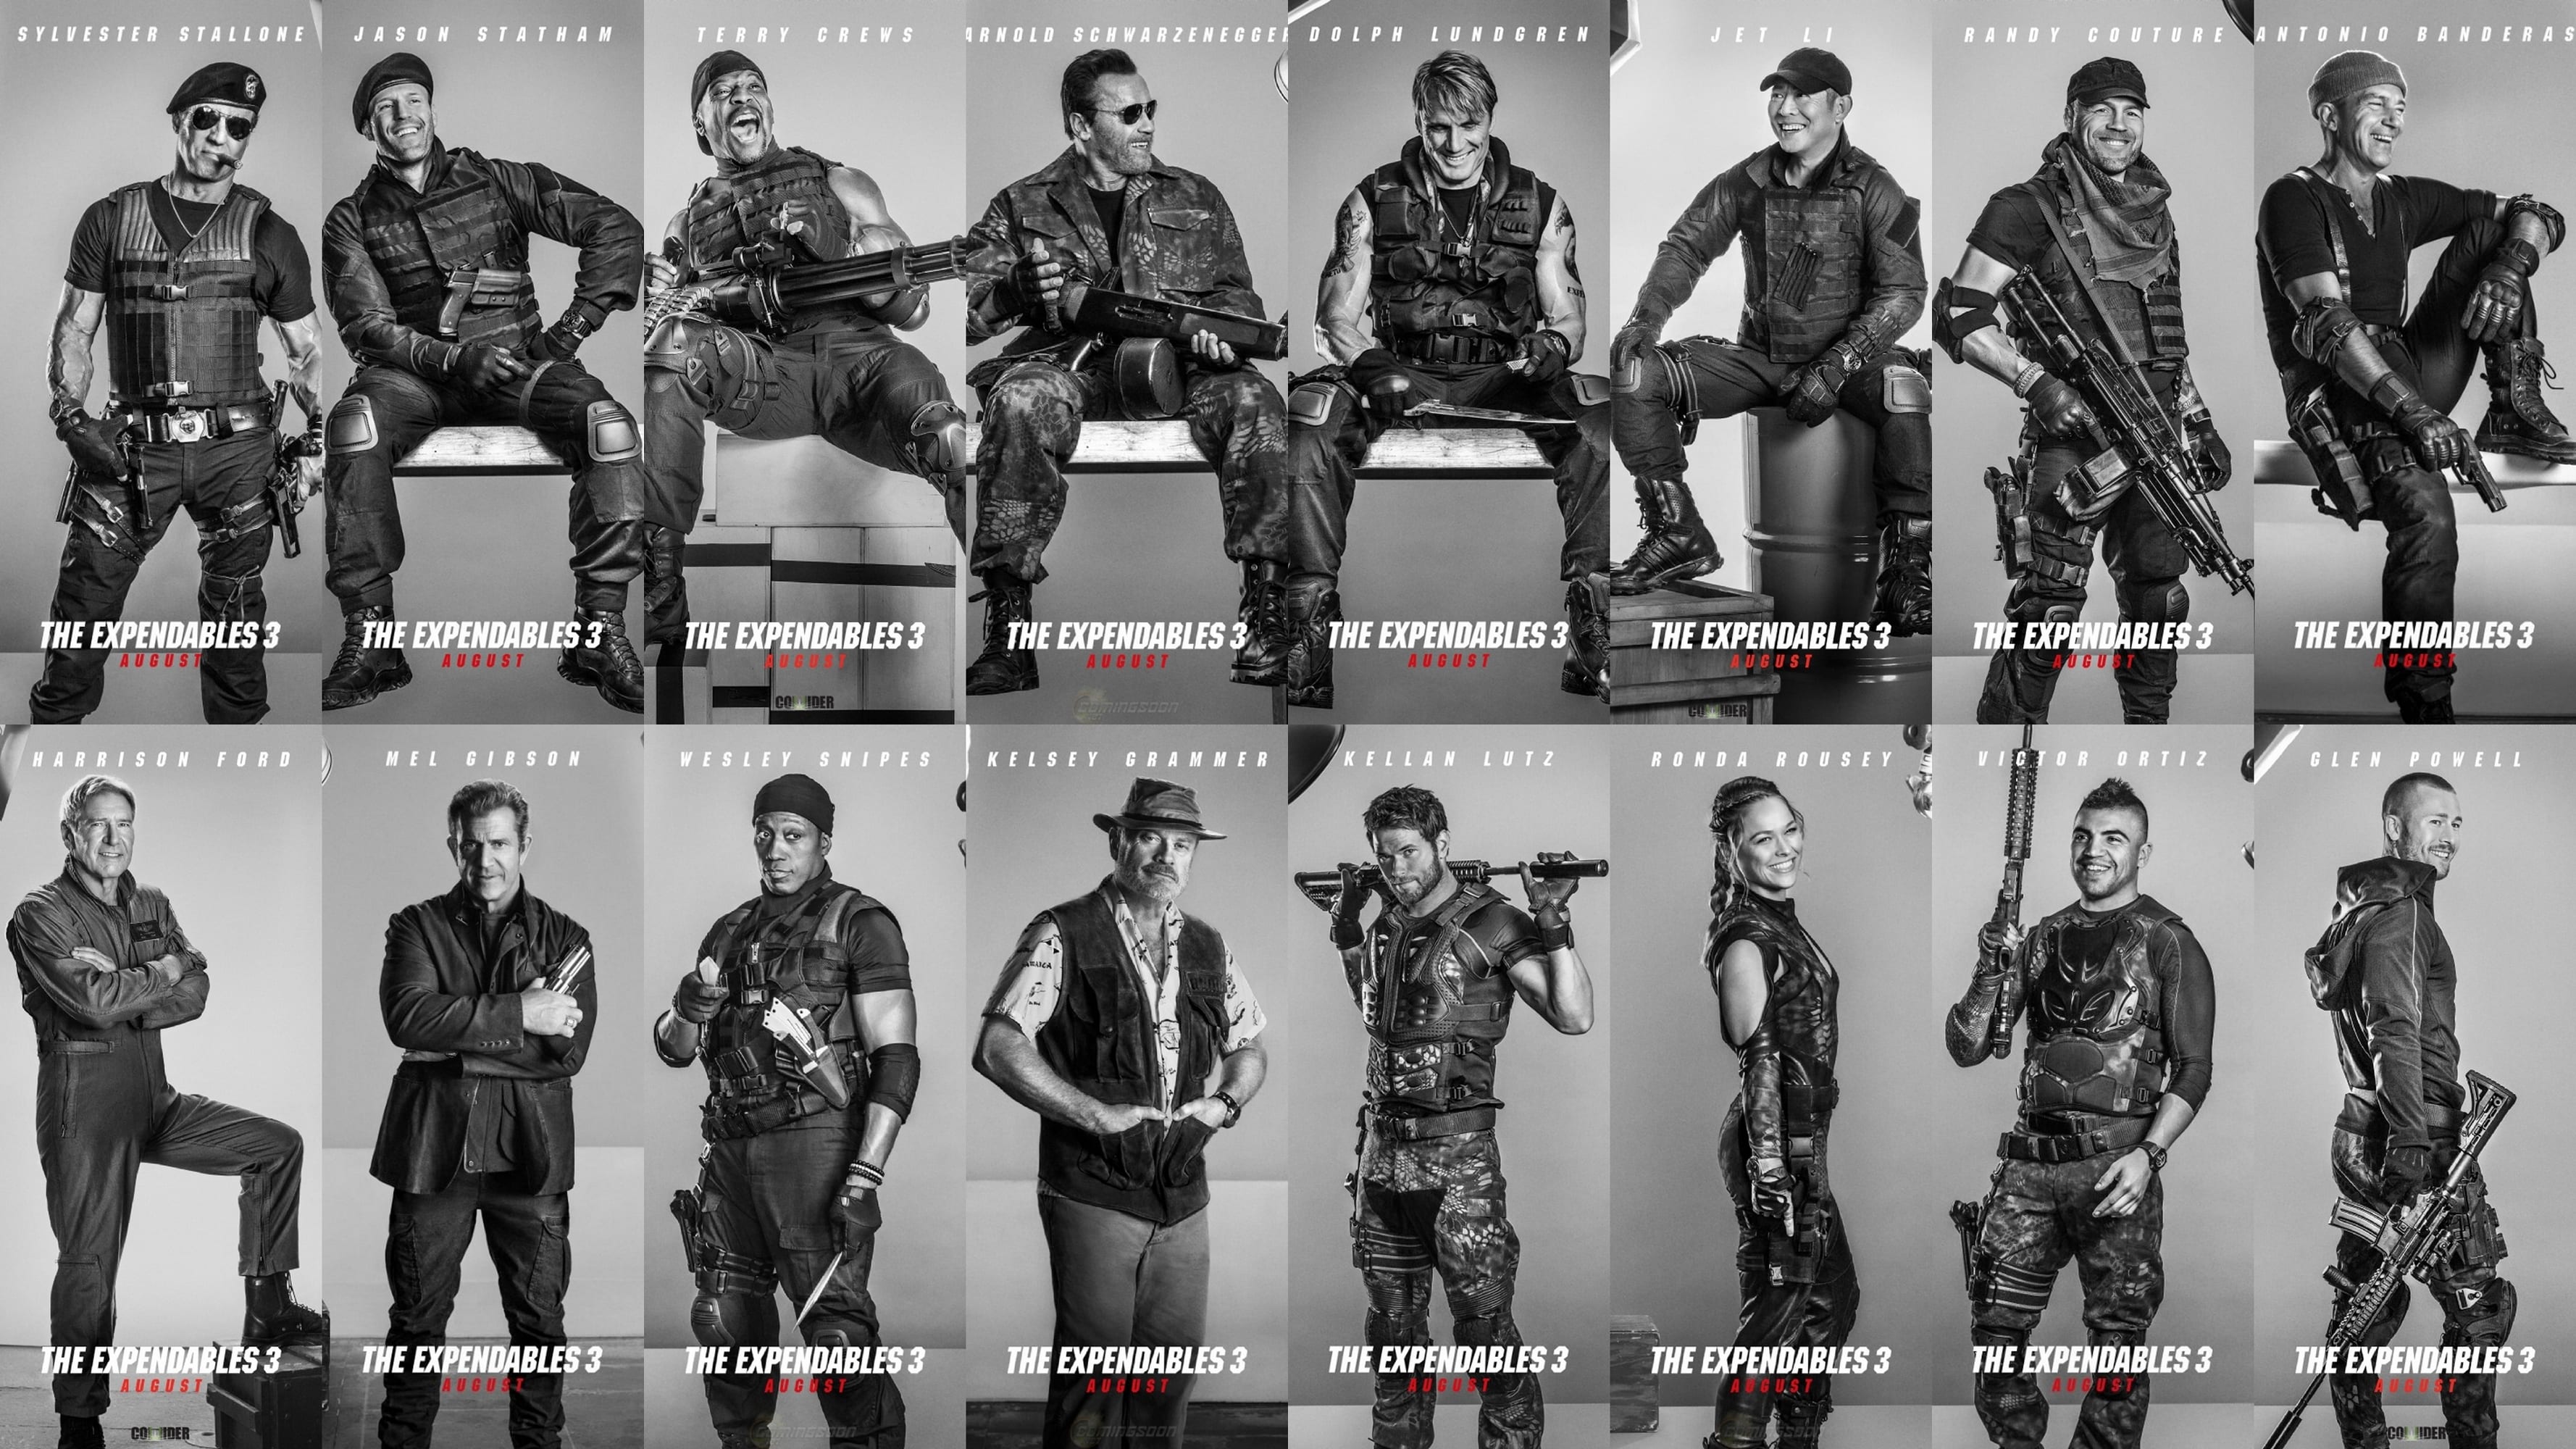 The Expendables 3 #10